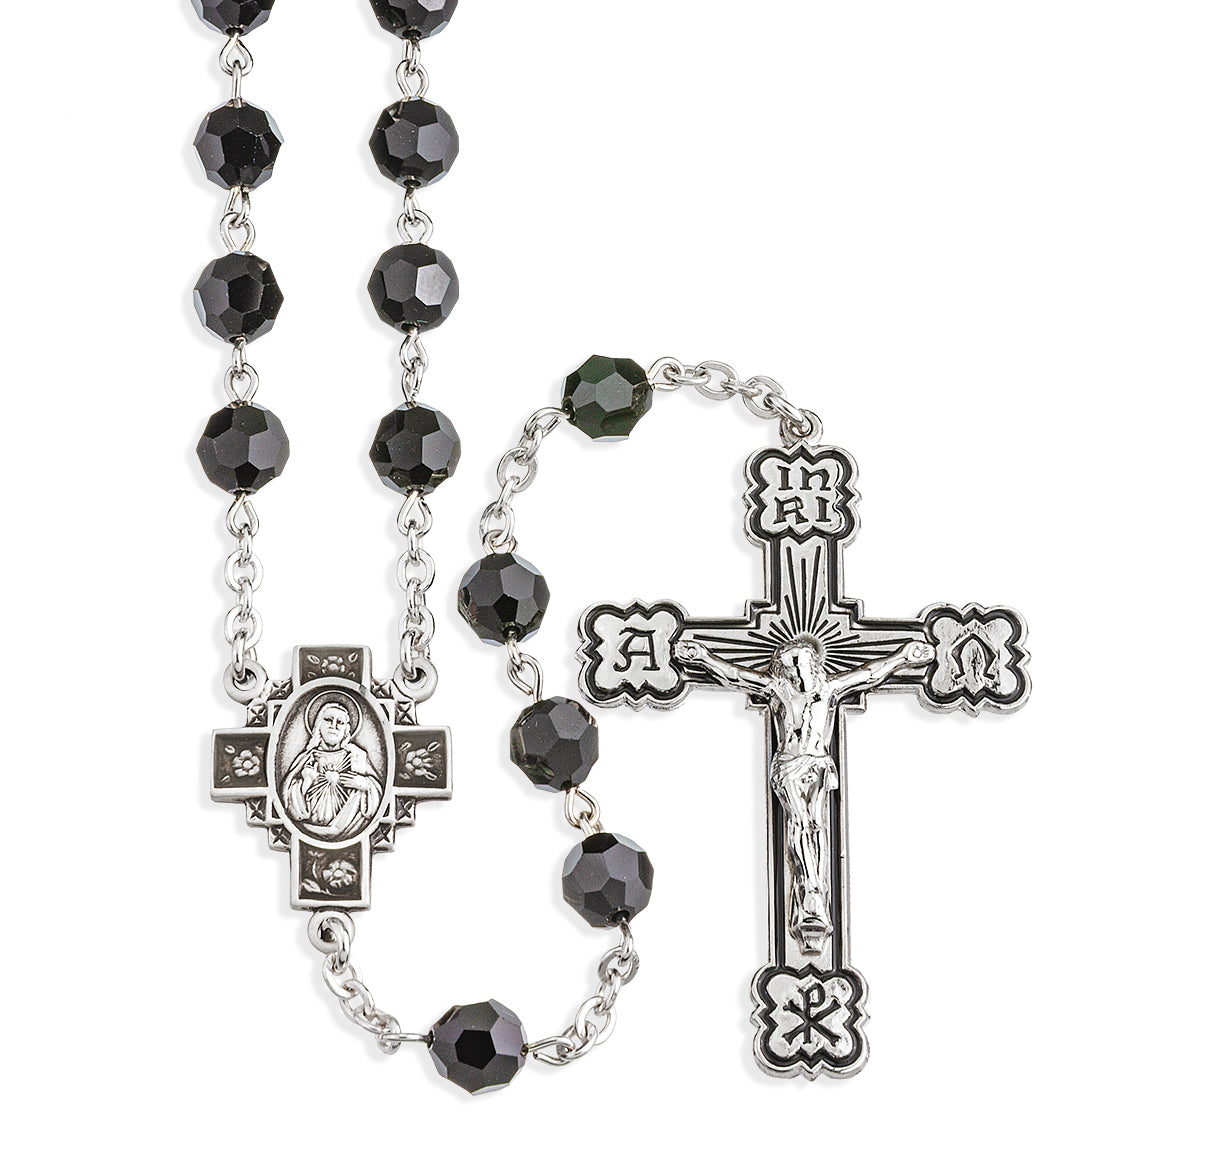 Rosary Sterling Crucifix and Centerpiece Created with Swarovski Crystal 7mm Faceted Jet Black Beads by HMH